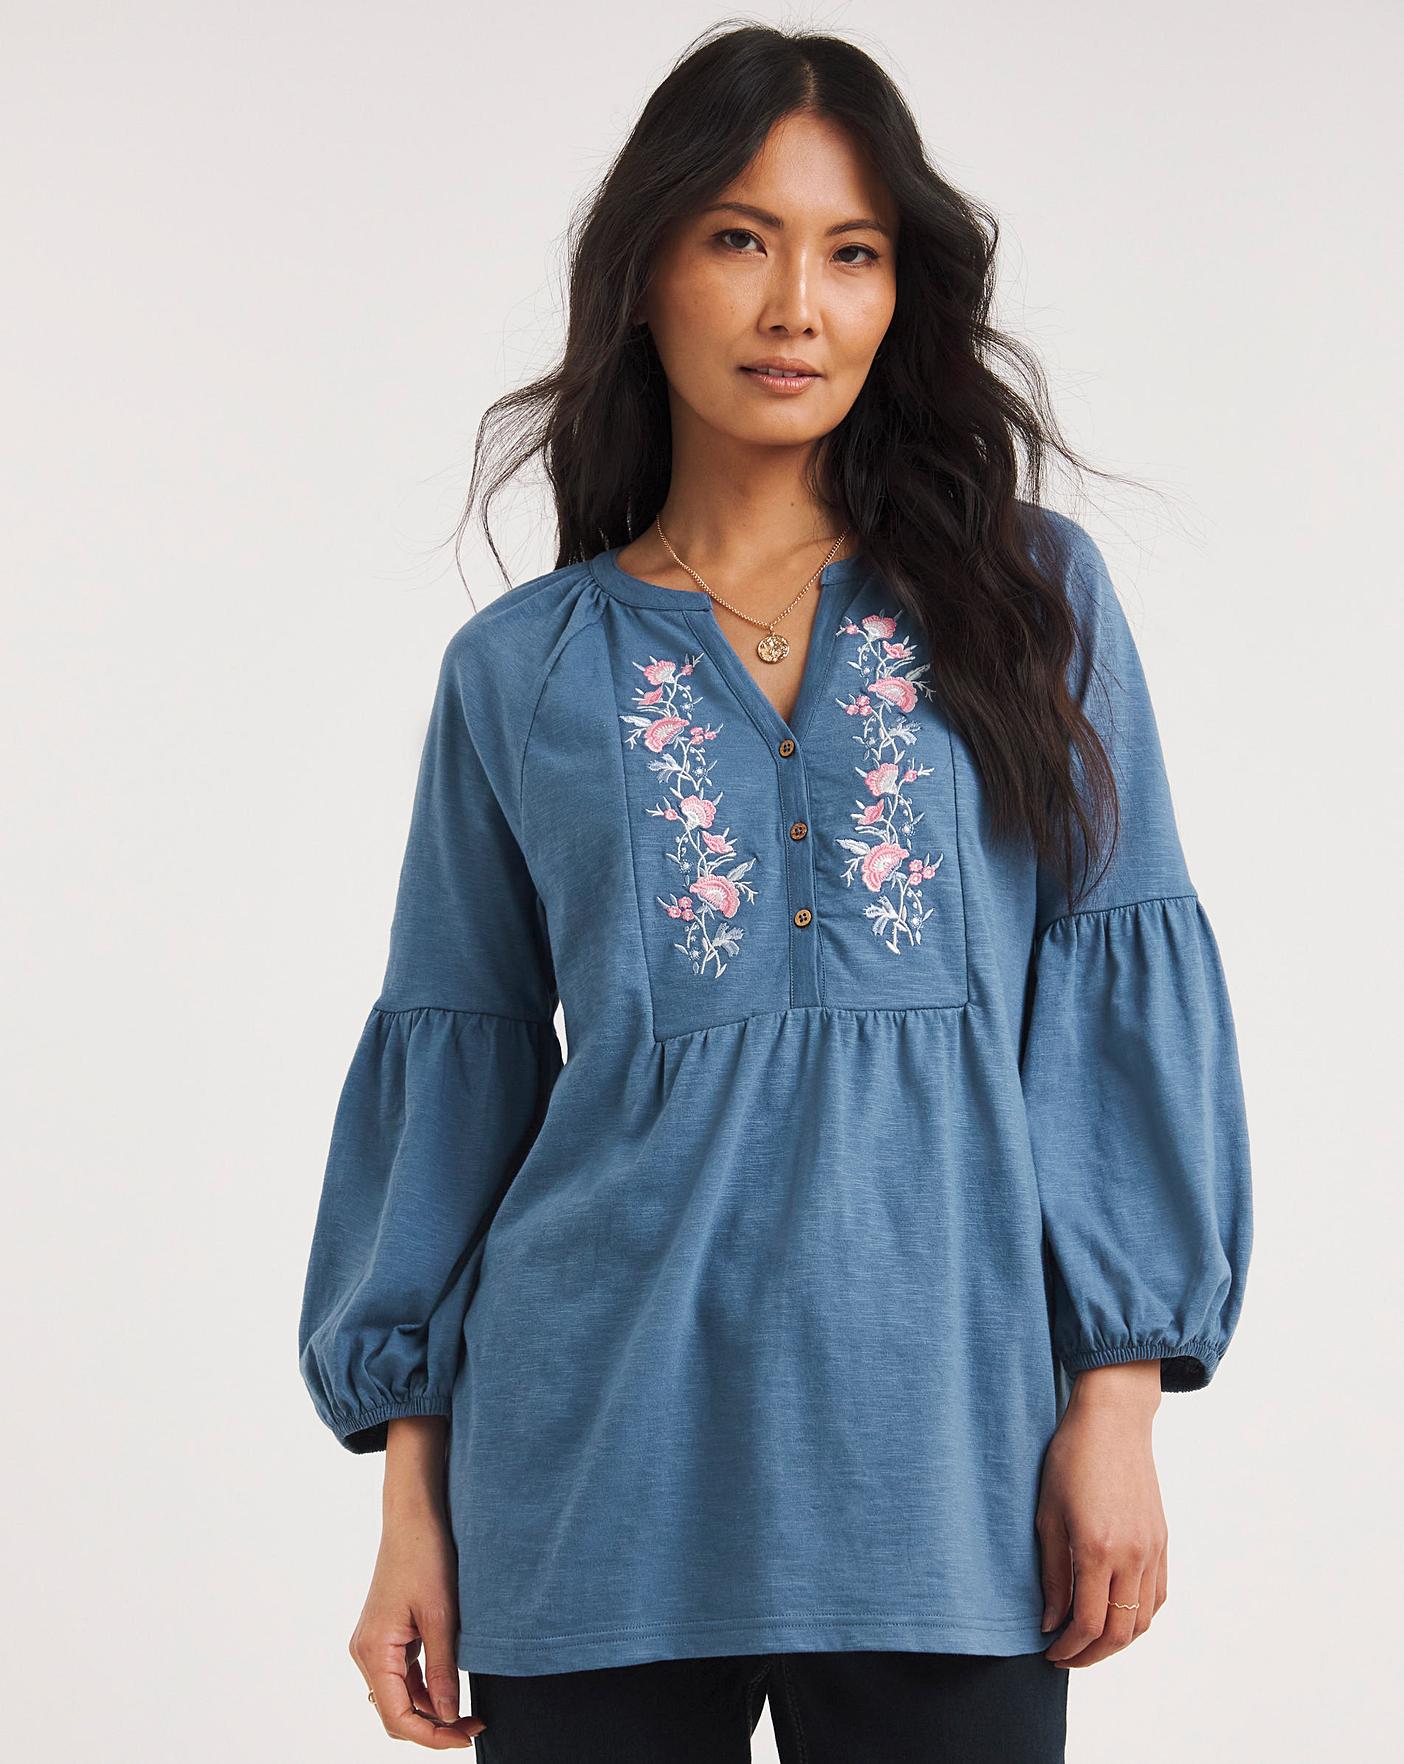 Julipa Embroidered Jersey Top | J D Williams